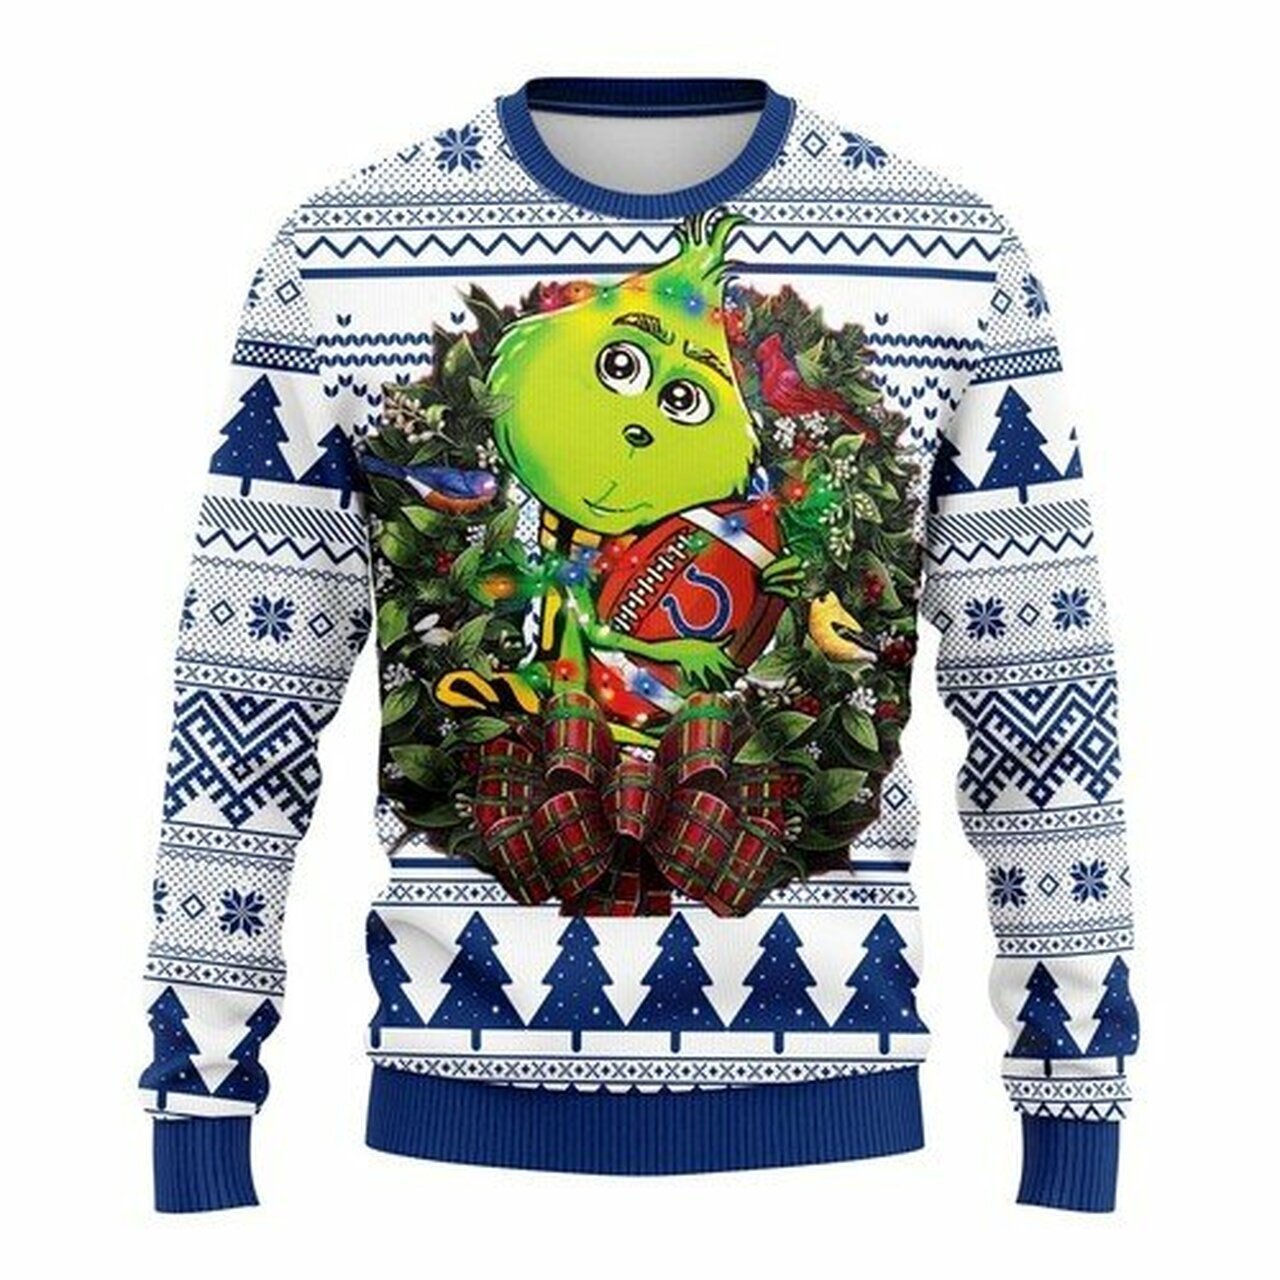 NFL Indianapolis Colts Grinch hug ugly christmas sweater